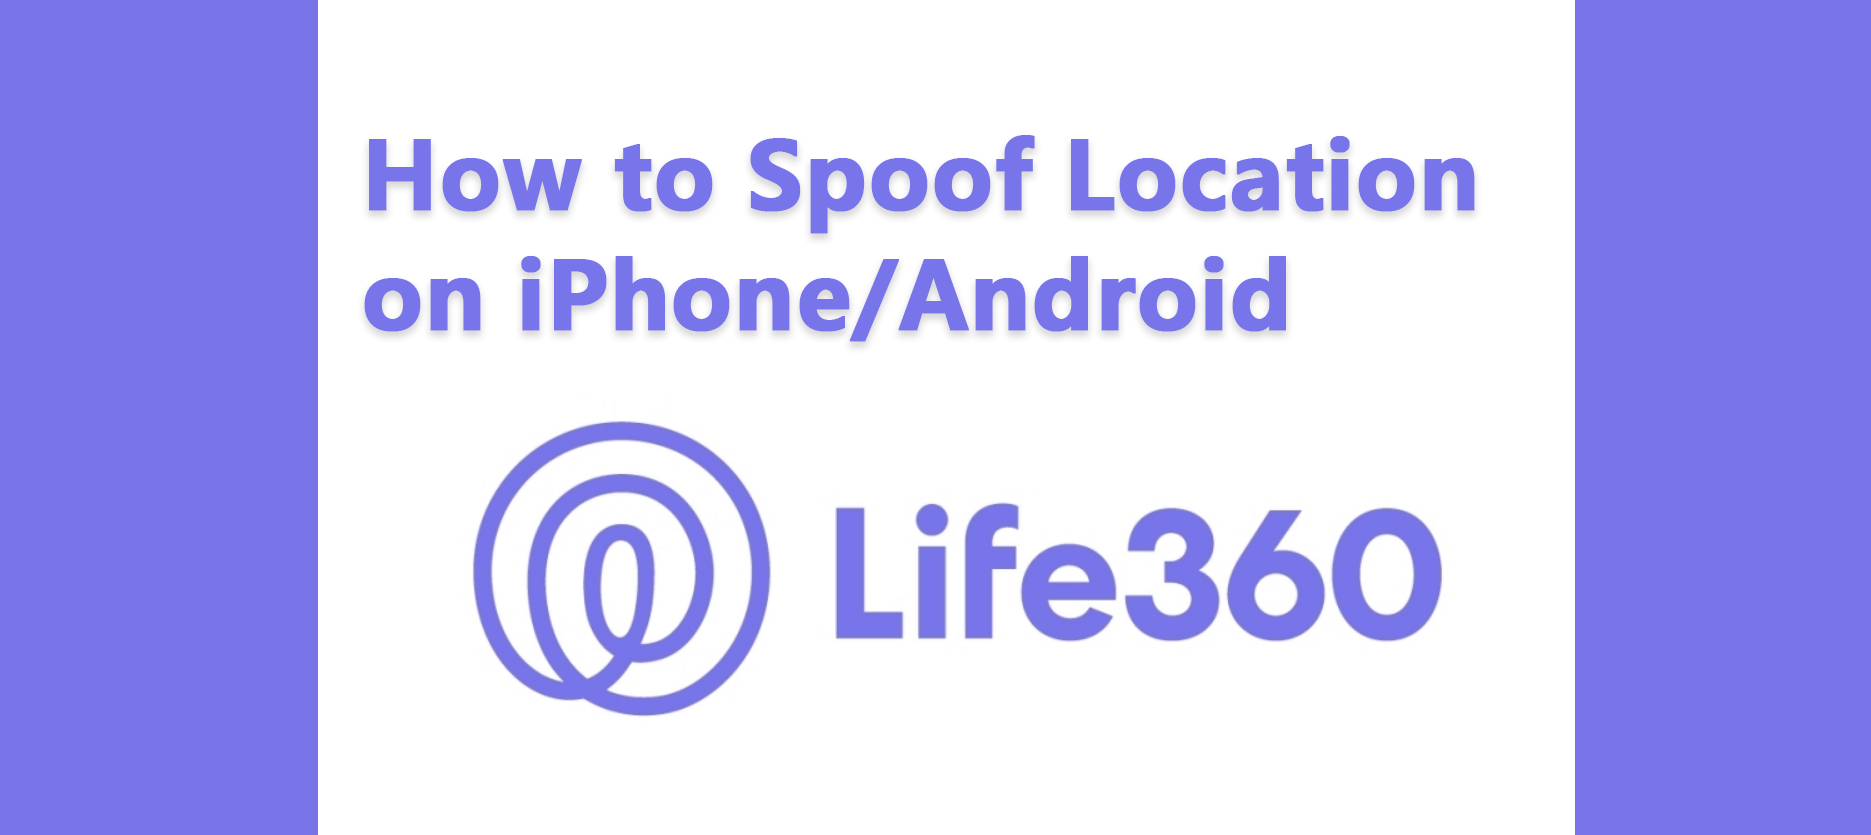 how to spoof life360 location